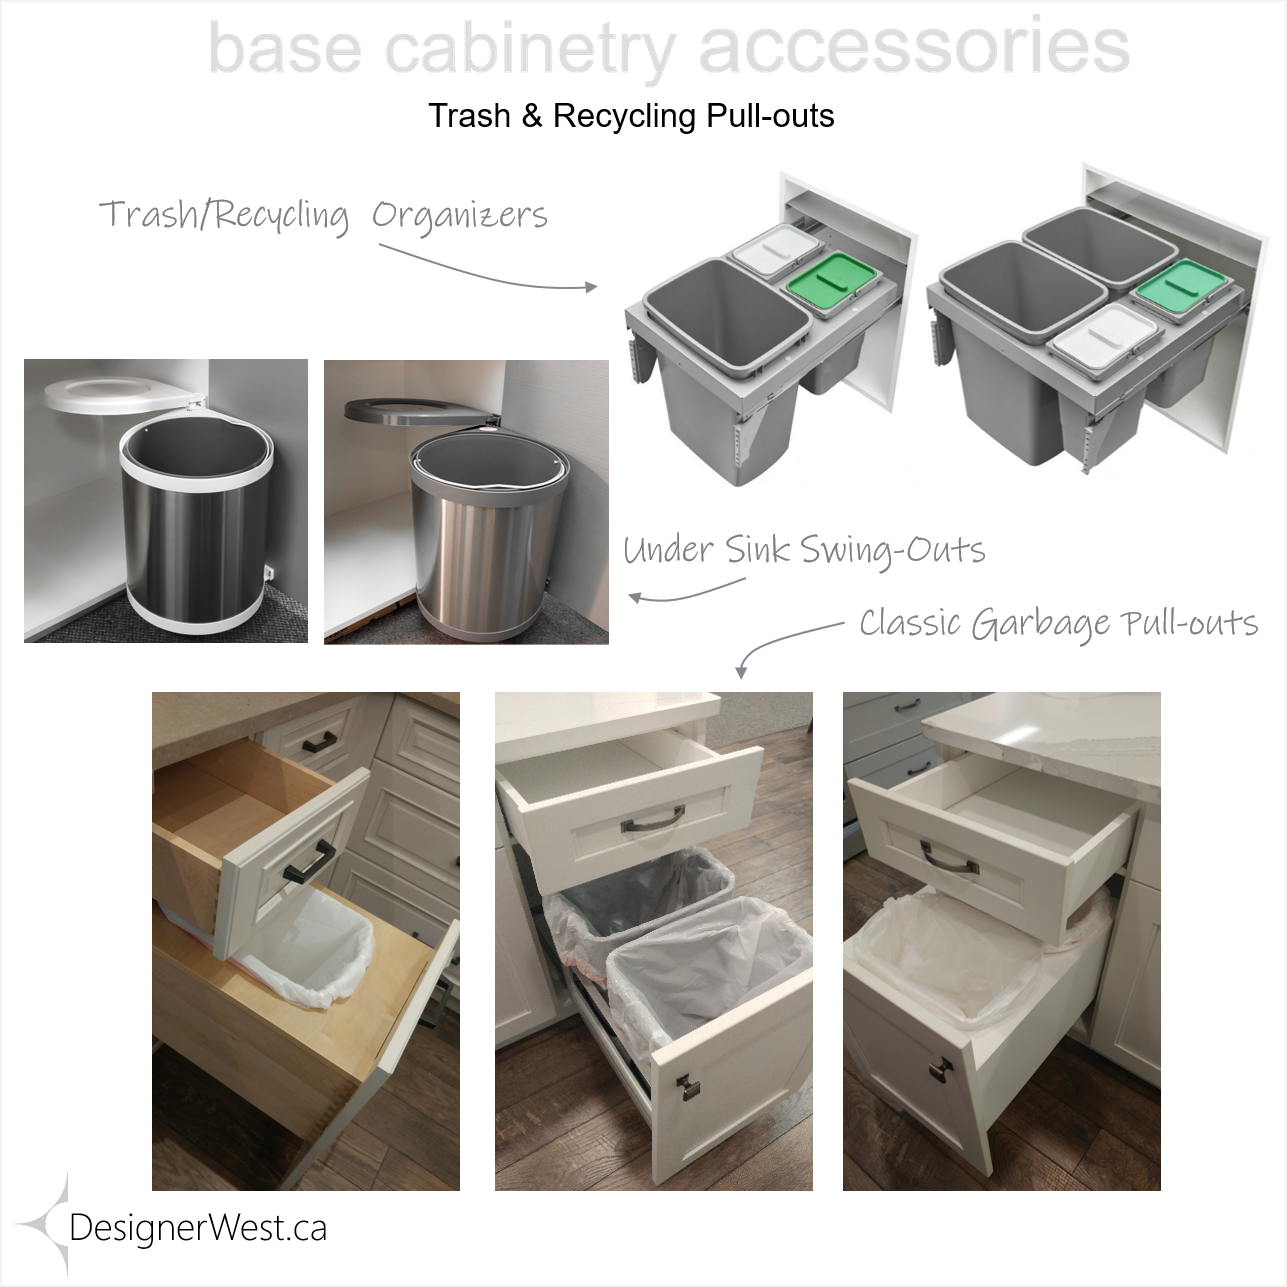 Trash & Recycling Cabinet Accessories